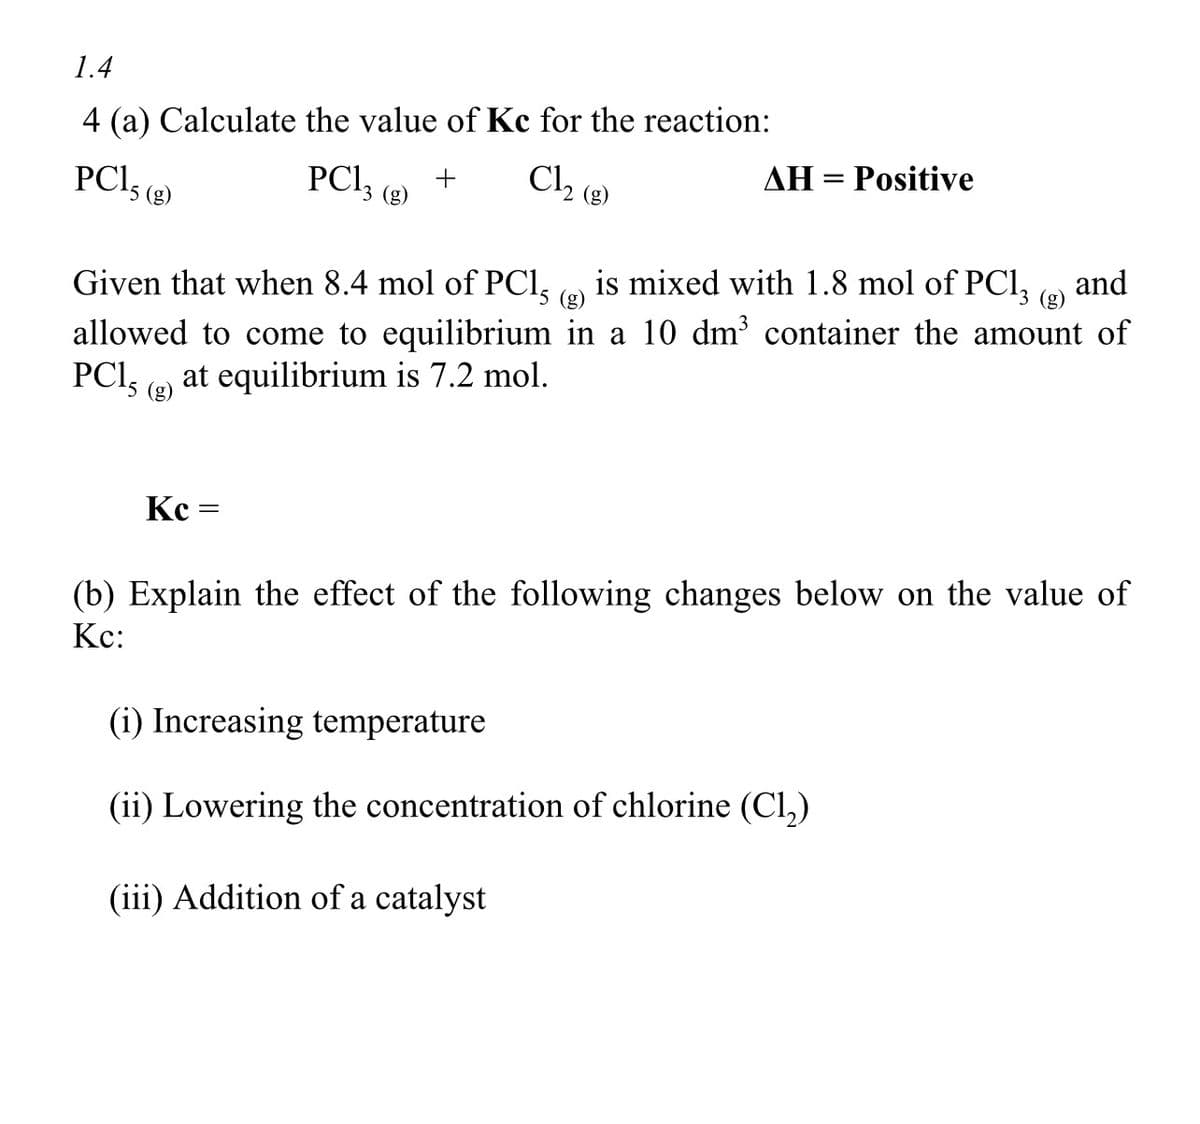 1.4
4 (a) Calculate the value of Kc for the reaction:
PC13 (g) +
Cl₂ (8)
PC15 (8)
Given that when 8.4 mol of PC15 (g)
AH = Positive
Kc =
is mixed with 1.8 mol of PC13 (g) and
allowed to come to equilibrium in a 10 dm³ container the amount of
PC1, at equilibrium is 7.2 mol.
¹5 (g)
(b) Explain the effect of the following changes below on the value of
Kc:
(i) Increasing temperature
(ii) Lowering the concentration of chlorine (C1₂)
(iii) Addition of a catalyst